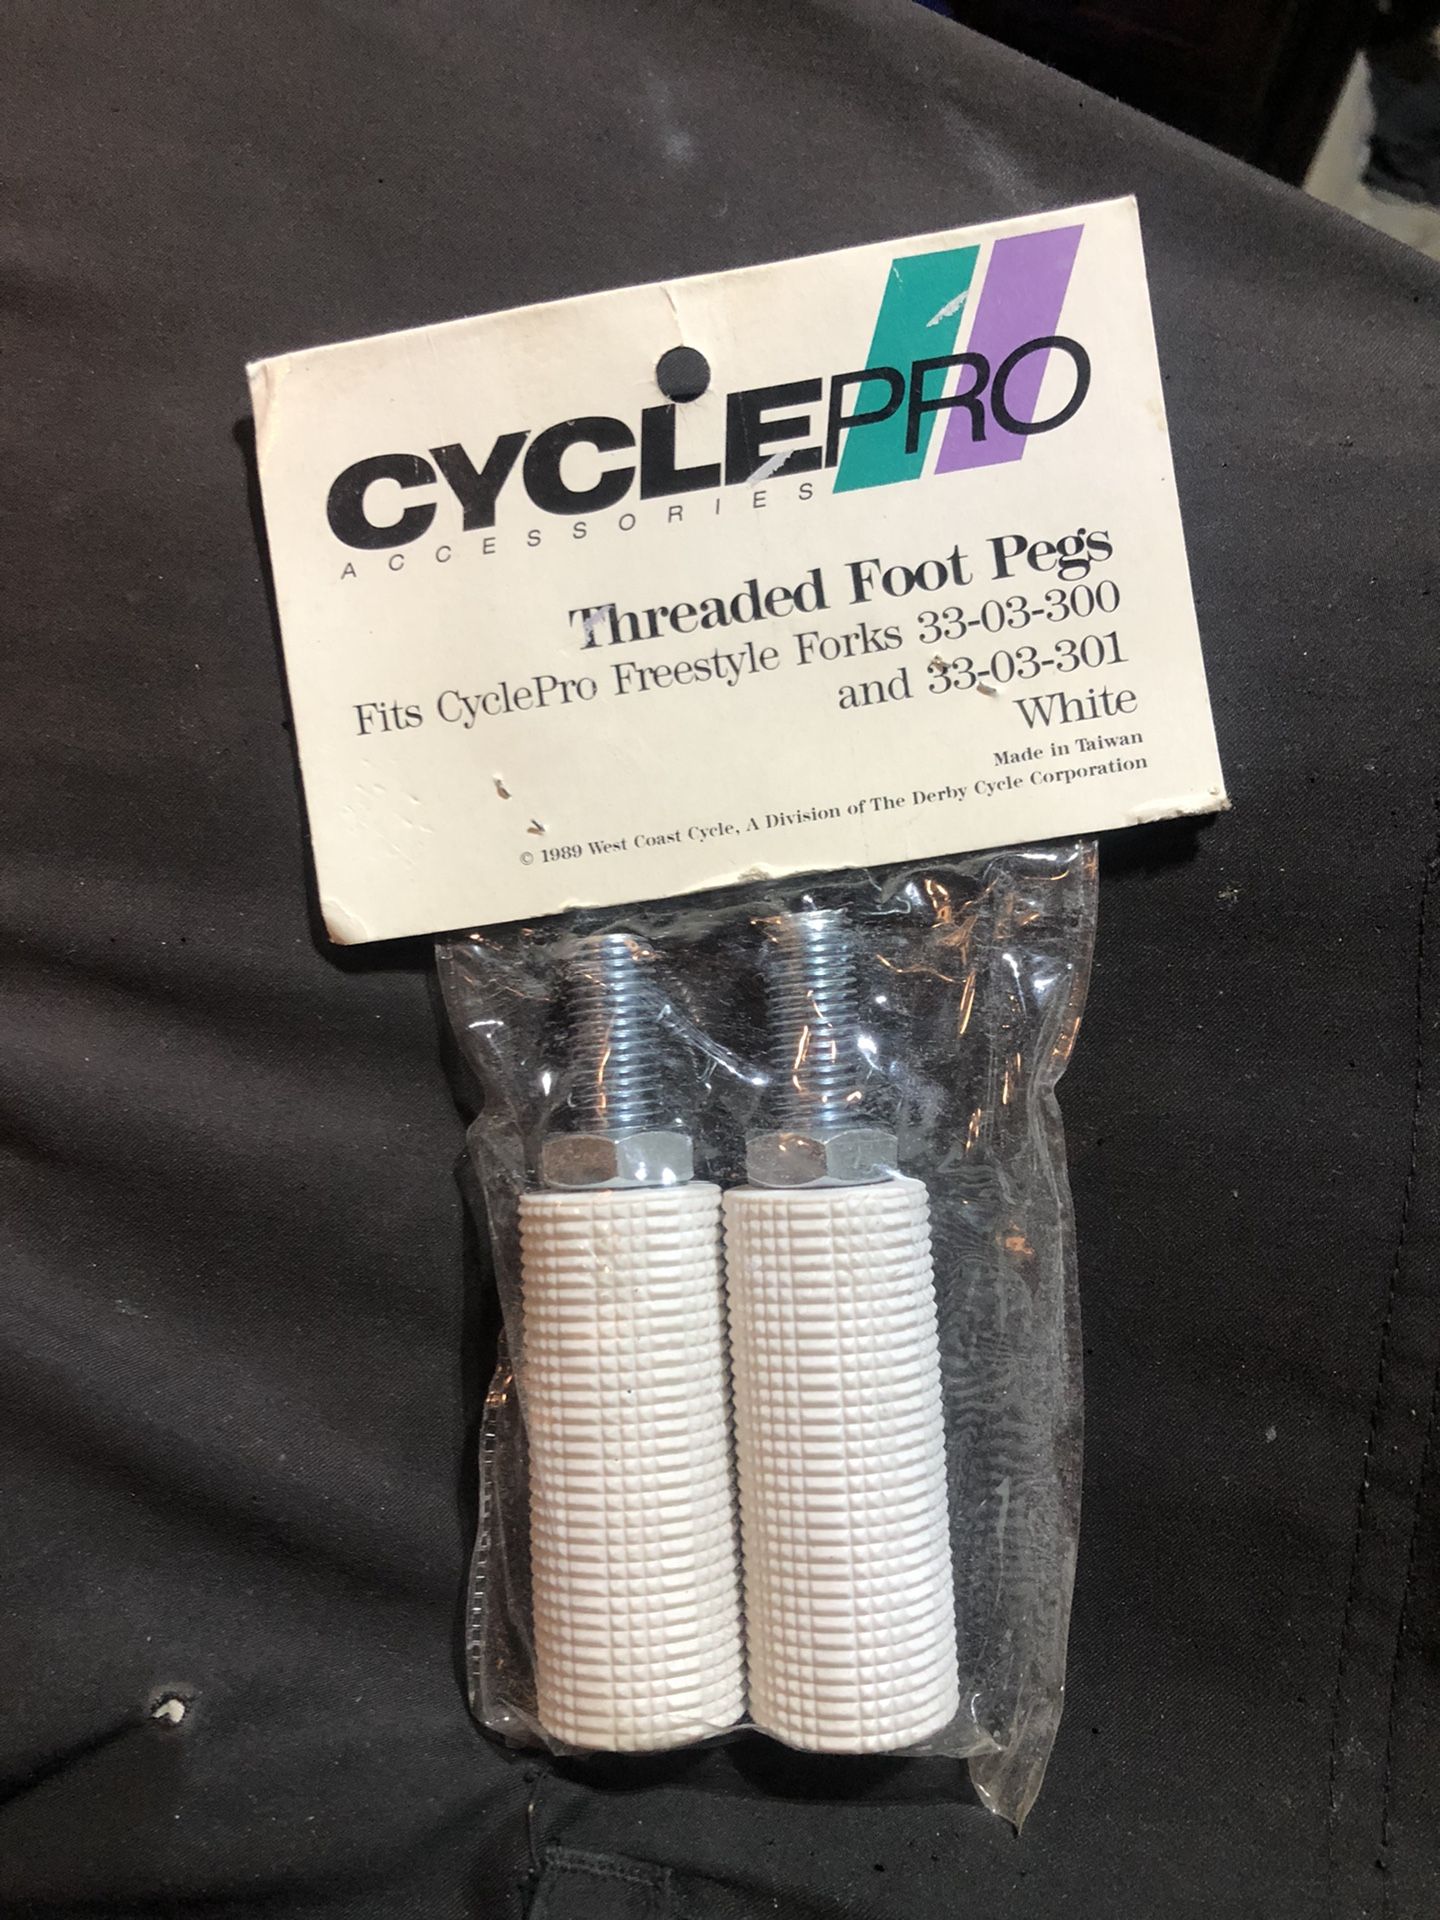 Cyclepro Bmx Threaded Foot Pegs (OBO)